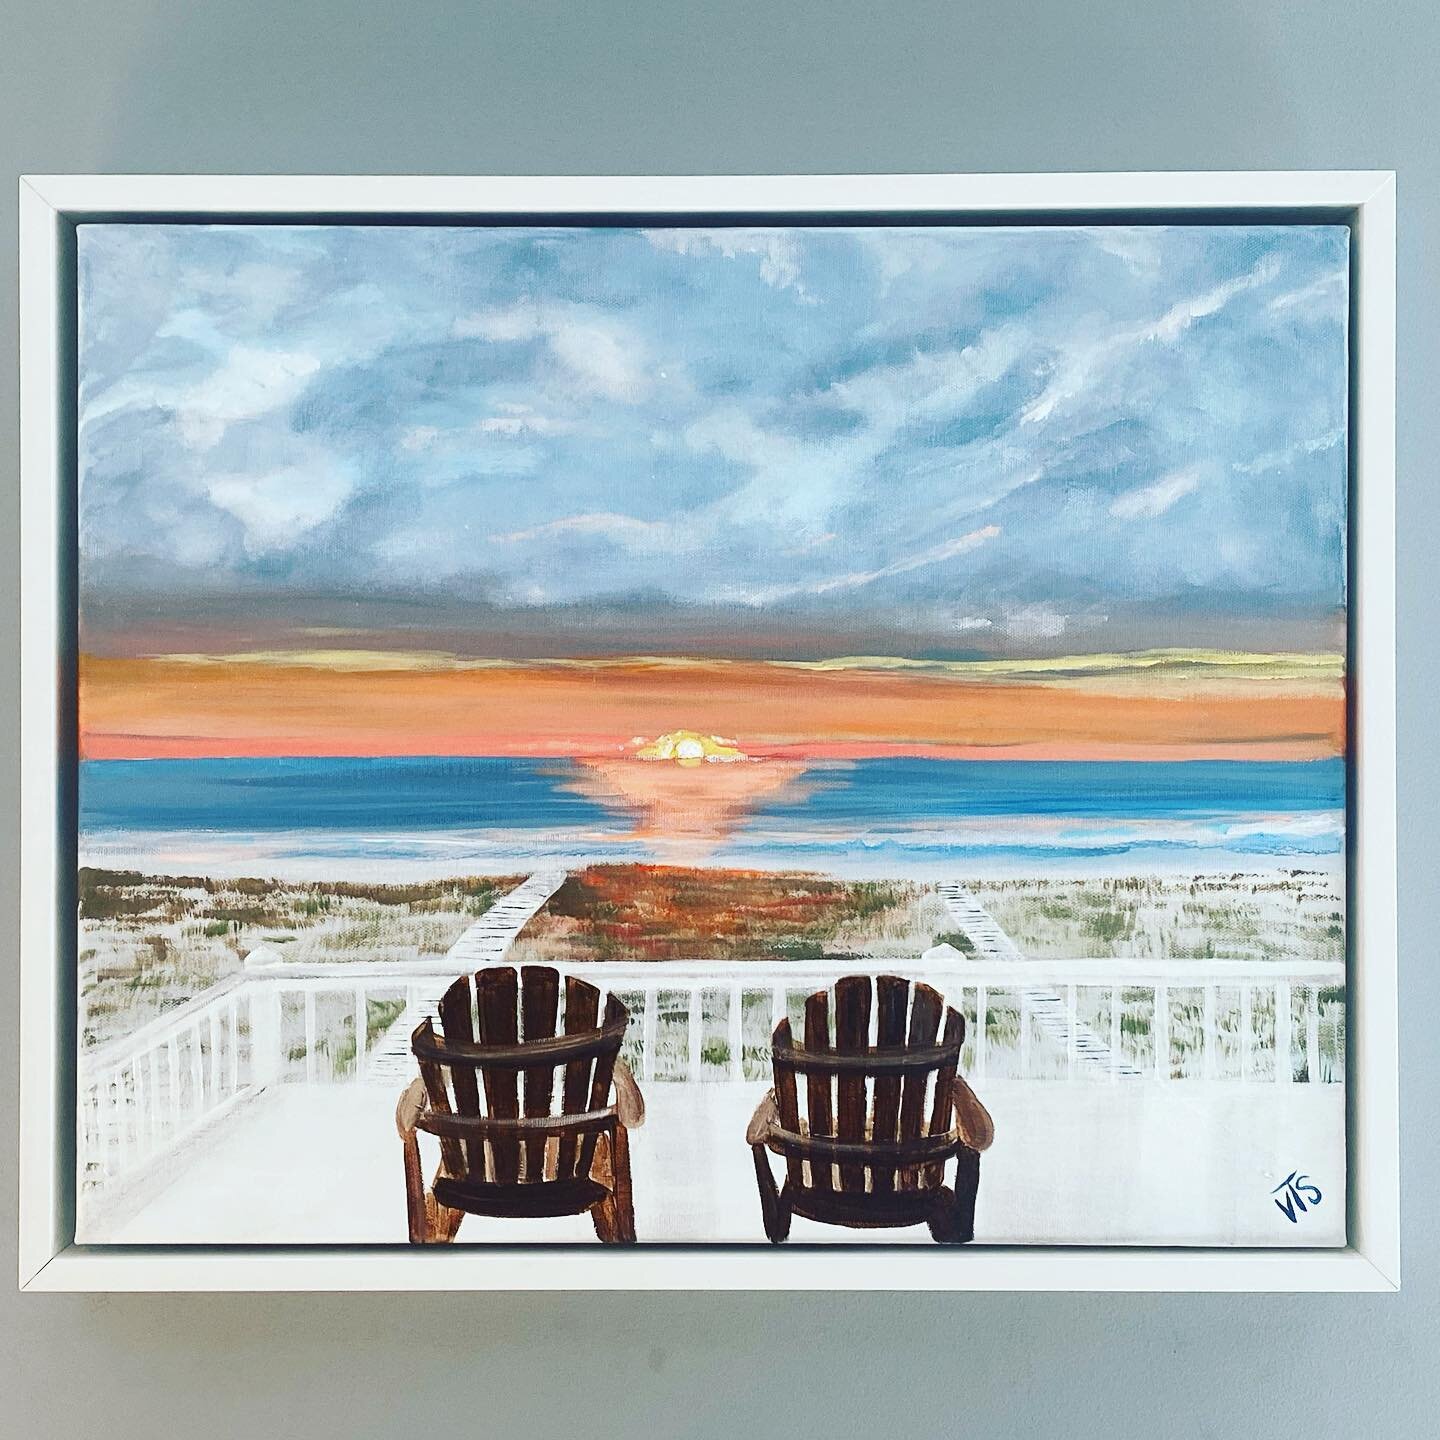 🌞Summer is officially HERE!!!!! My favorite season for so many reasons but mostly because of scenes like this LBI SUNRISE 🌅 #longbeachisland #sunrise #oceanview #family #commissionedart #seascape @duffyei23